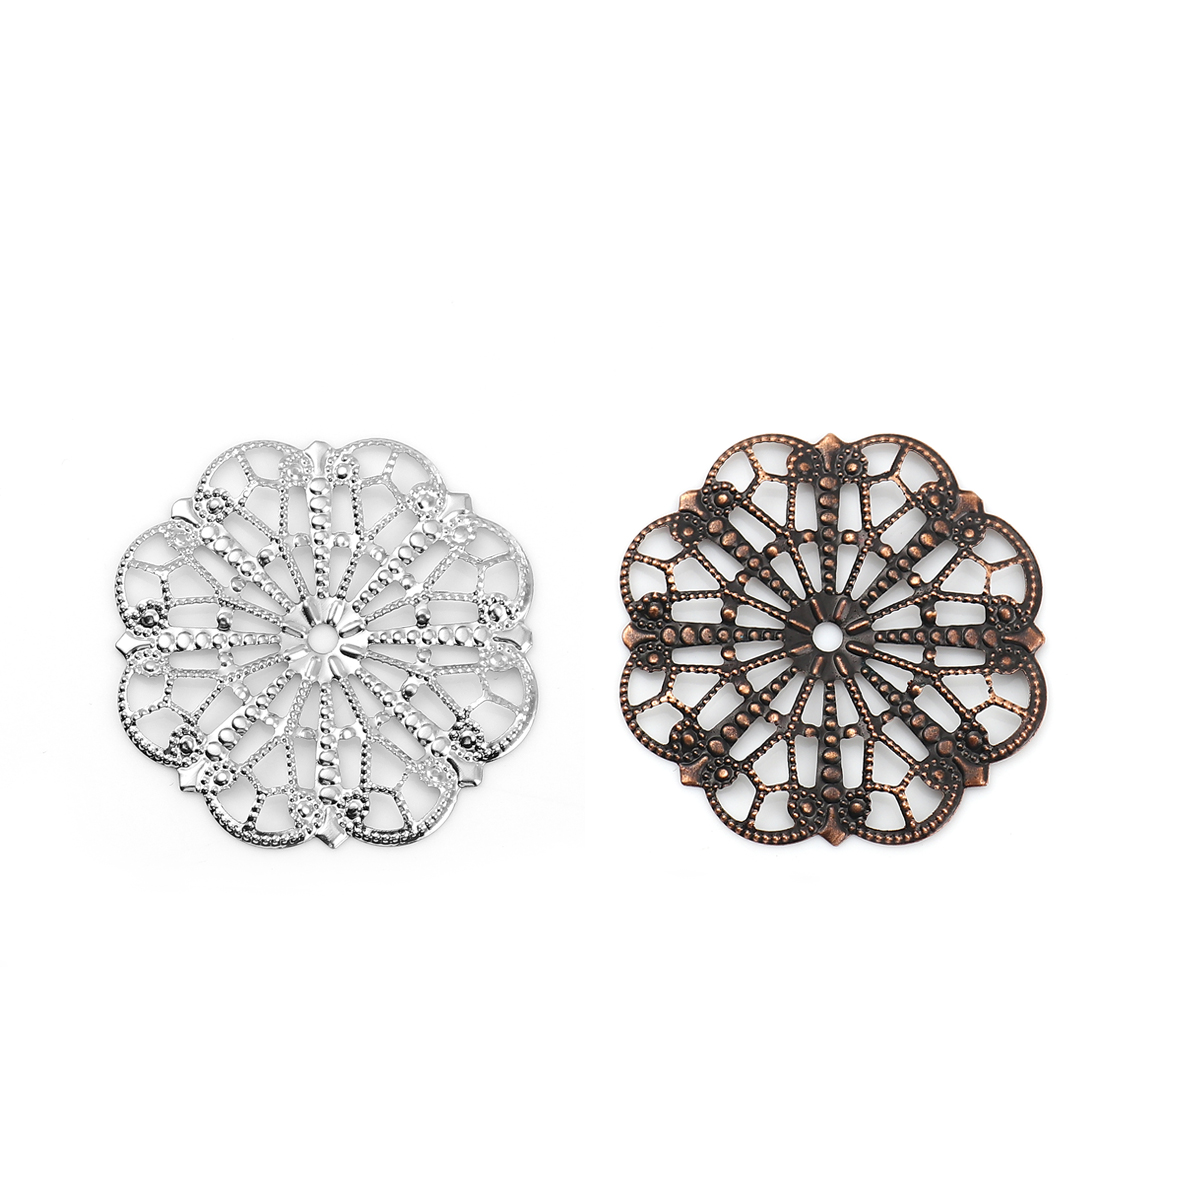 Picture of Iron Based Alloy Filigree Stamping Embellishments Flower Silver Tone 41mm(1 5/8") x 41mm(1 5/8"), 50 PCs